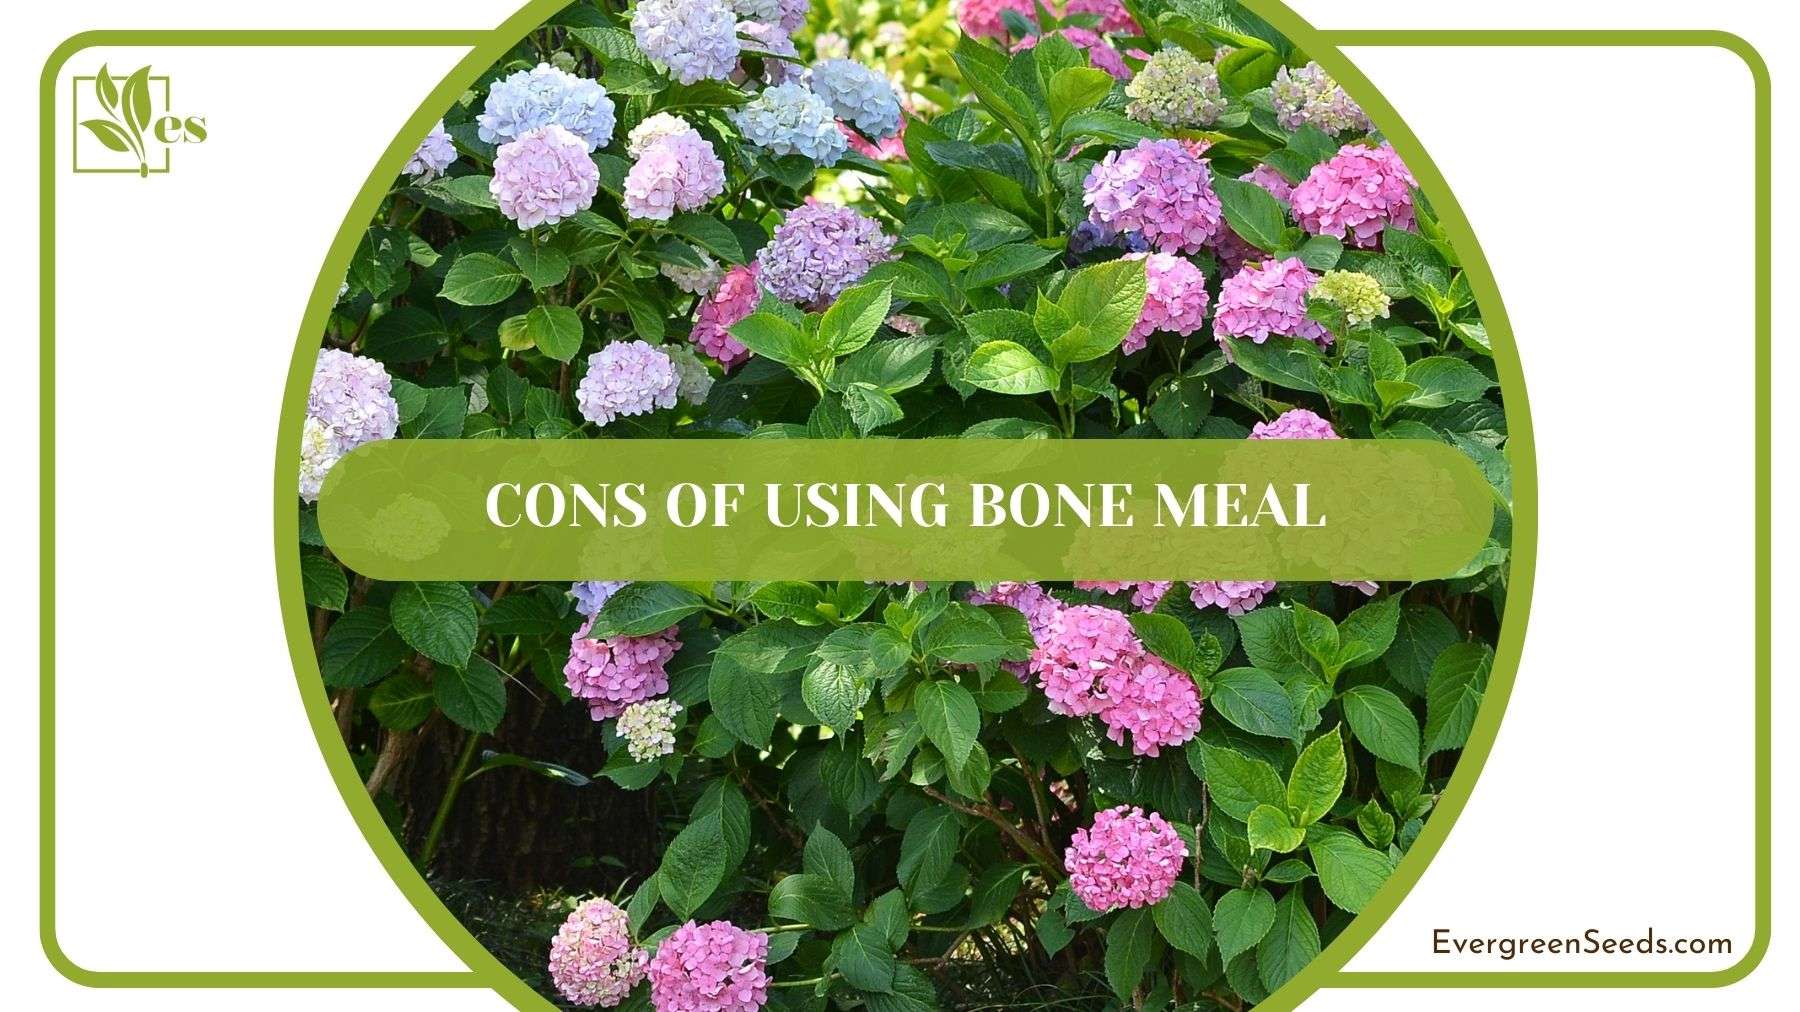 Cons of Using Bone Meal